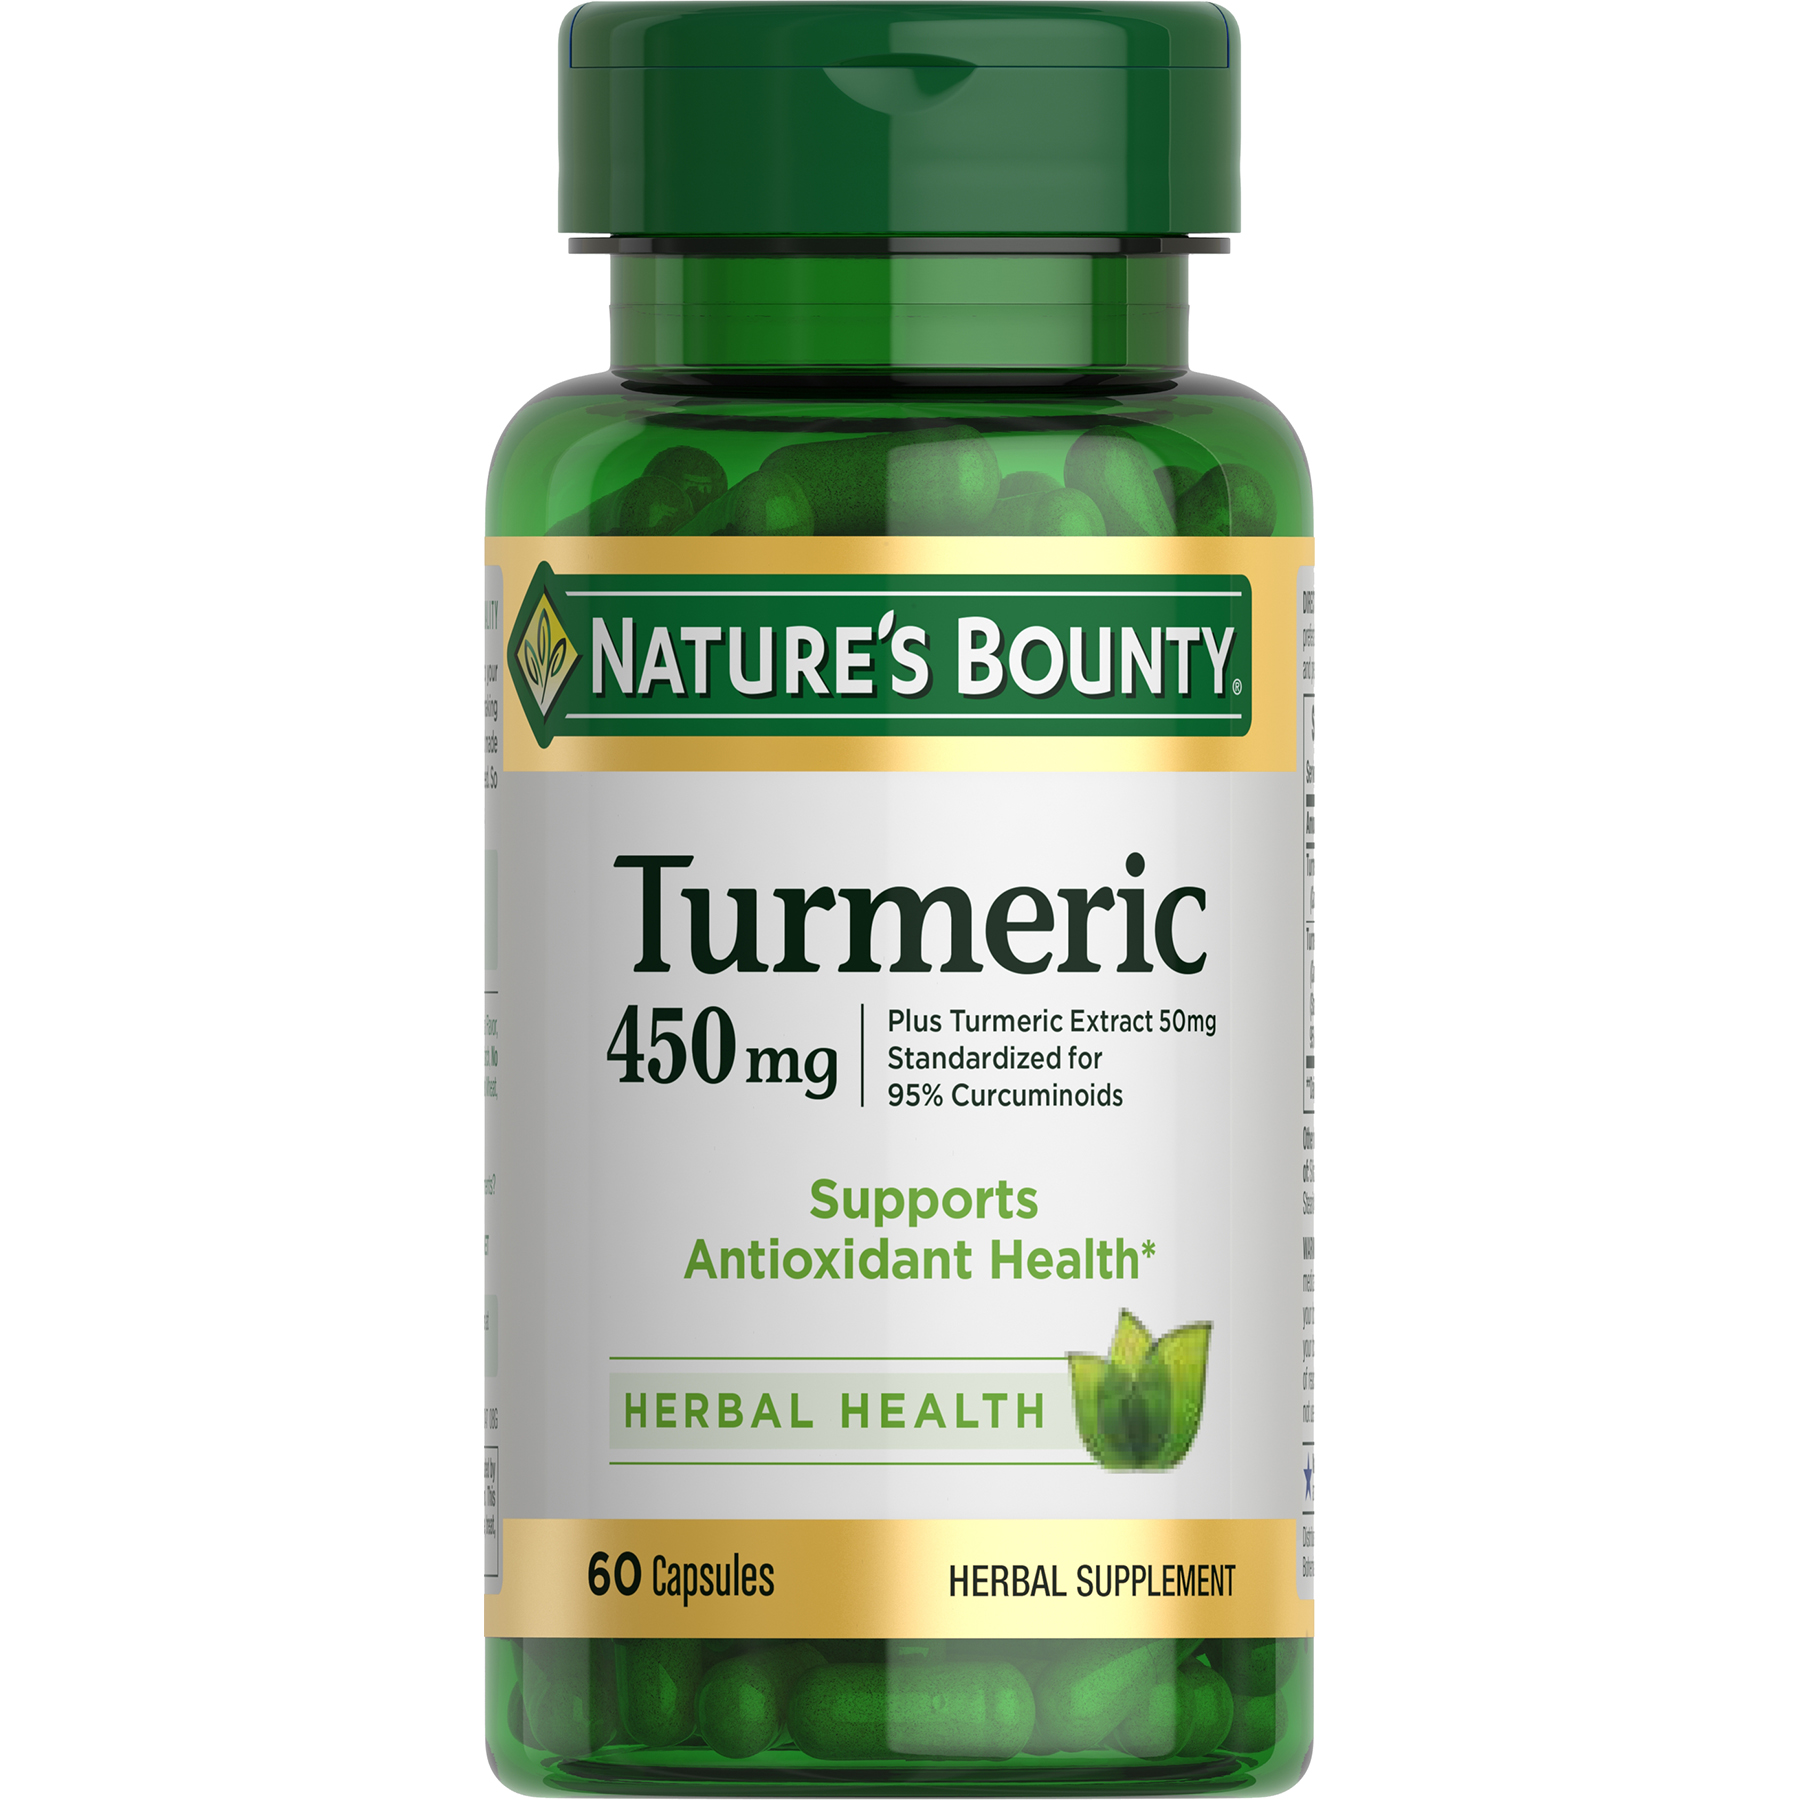 Nature's Bounty Turmeric 450 mg Capsules for Antioxidant Health, 60 Ct - image 1 of 5